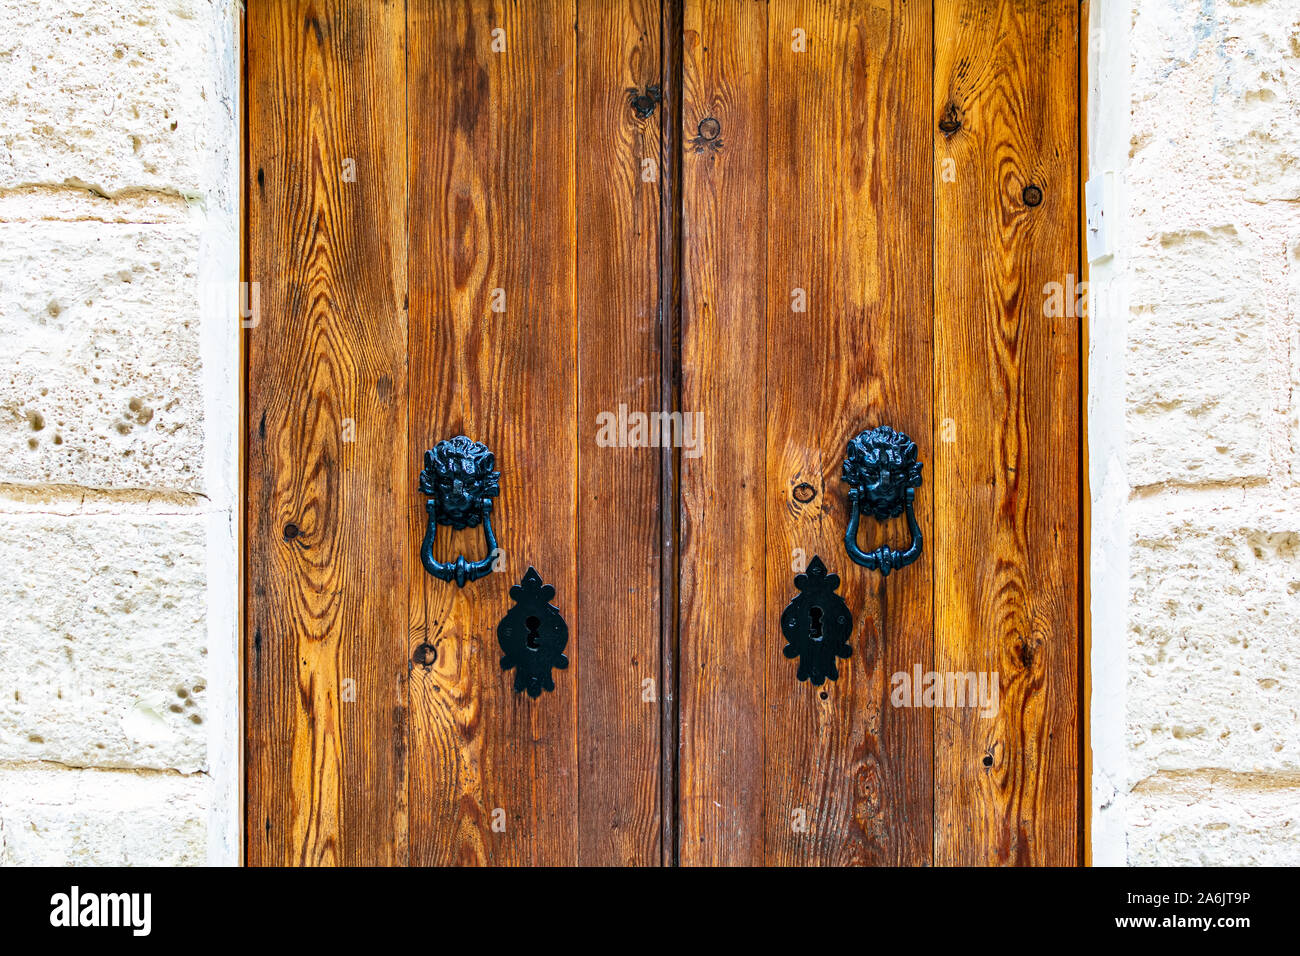 Natural wooden door with black vintage knockers as lion heads and black ornately shaped key-holes. Wooden door with black hardware. Stock Photo